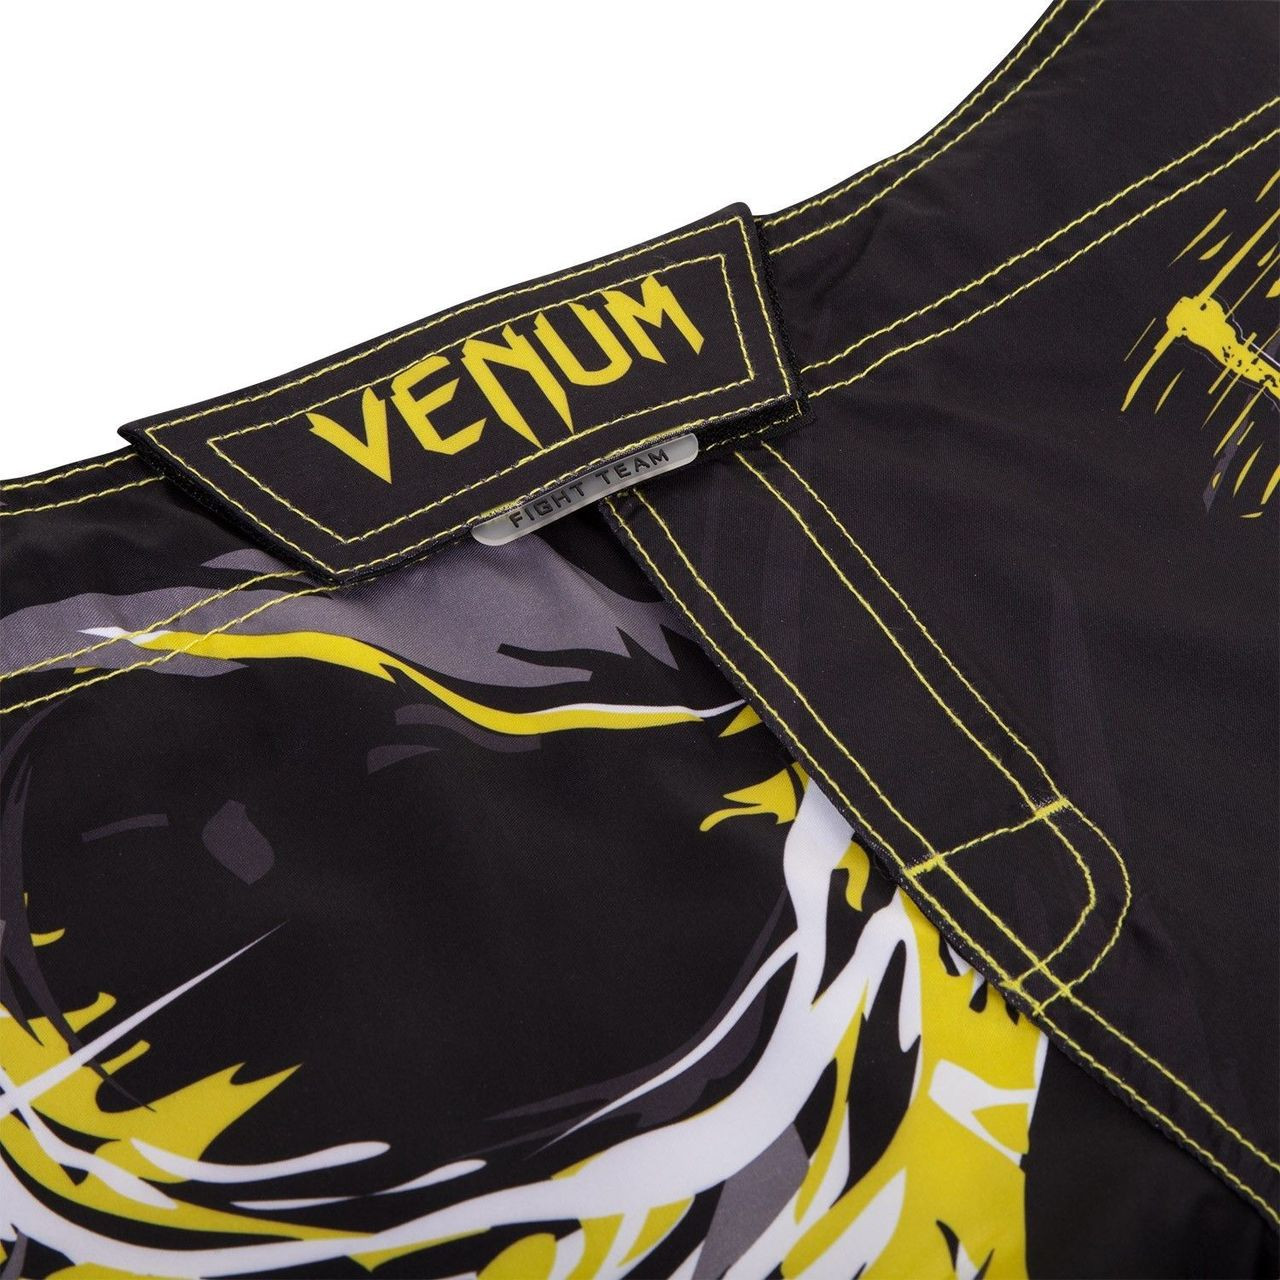 Zoom into the Venum Viking Fight Shorts now available at www.thejiujitsushop.com 

Enjoy Free Shiping from The Jiu Jitsu Shop today on all your Venum Fight Co Gear